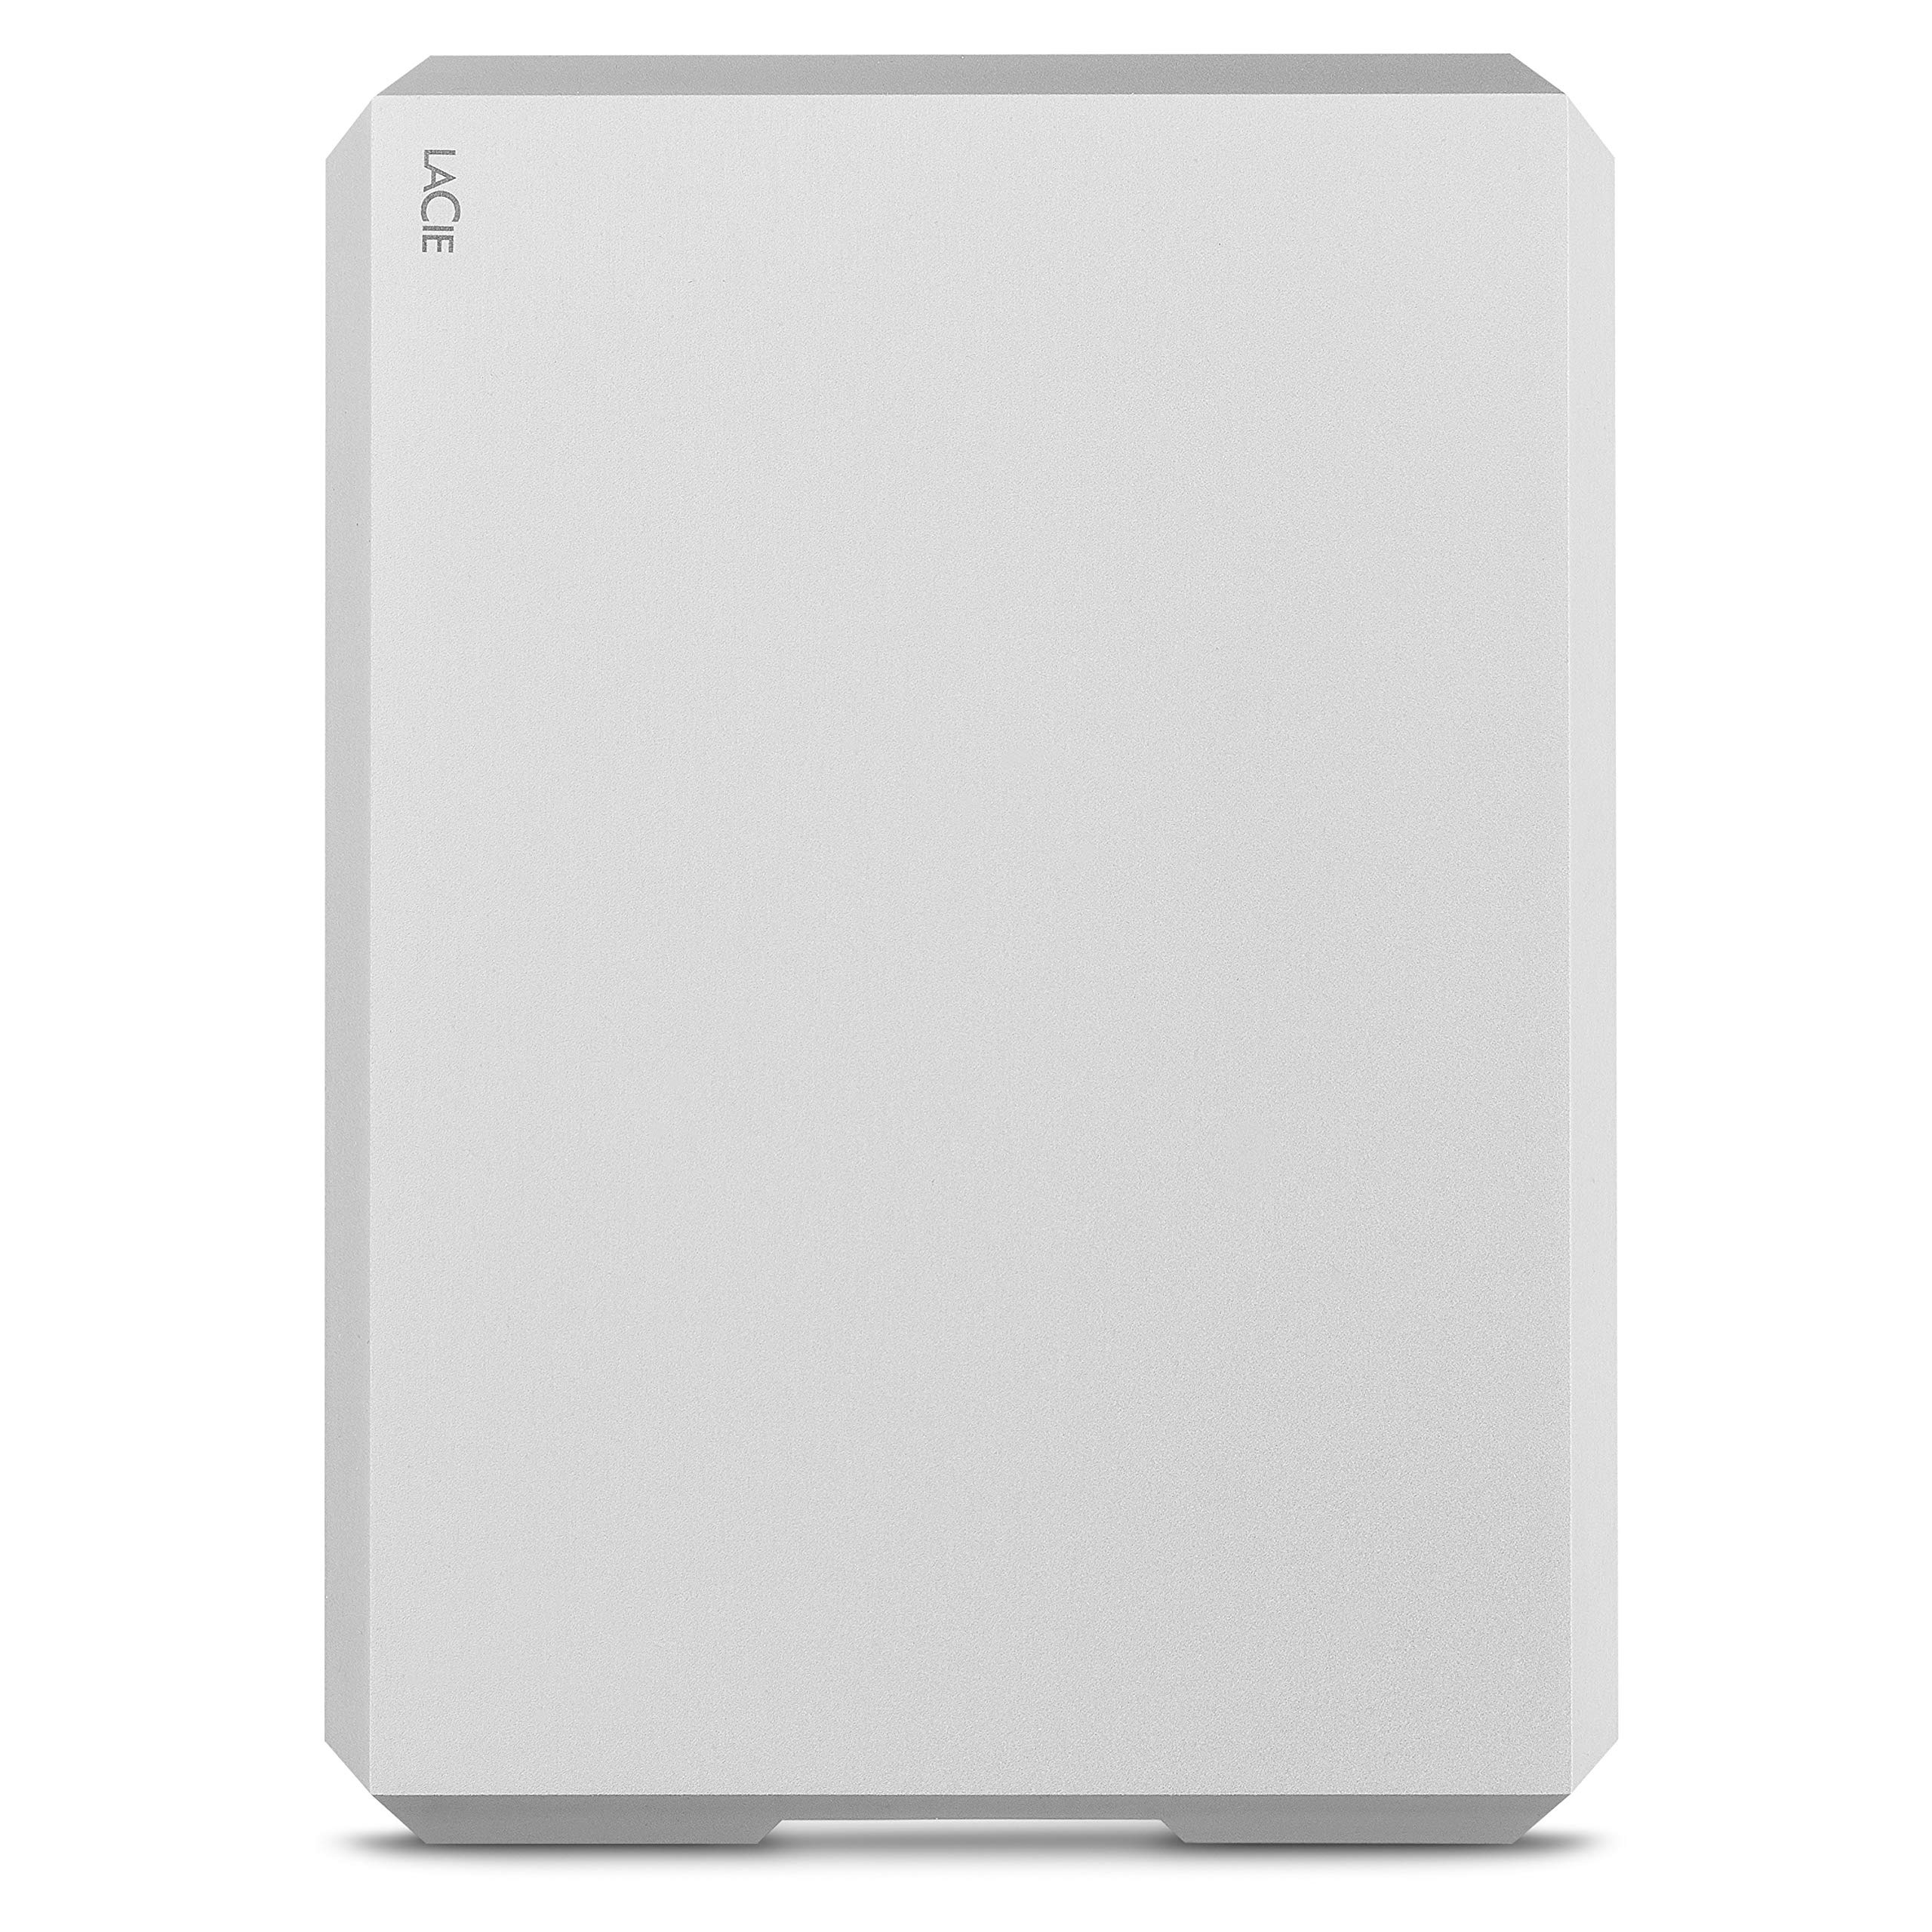 LaCie MOBILE DRIVE Moon 2TB tragbare externe Festplatte, 2.5 Zoll, Mac & PC, silber, inkl. 2 Jahre Rescue Service, Modellnr.: STHG2000400